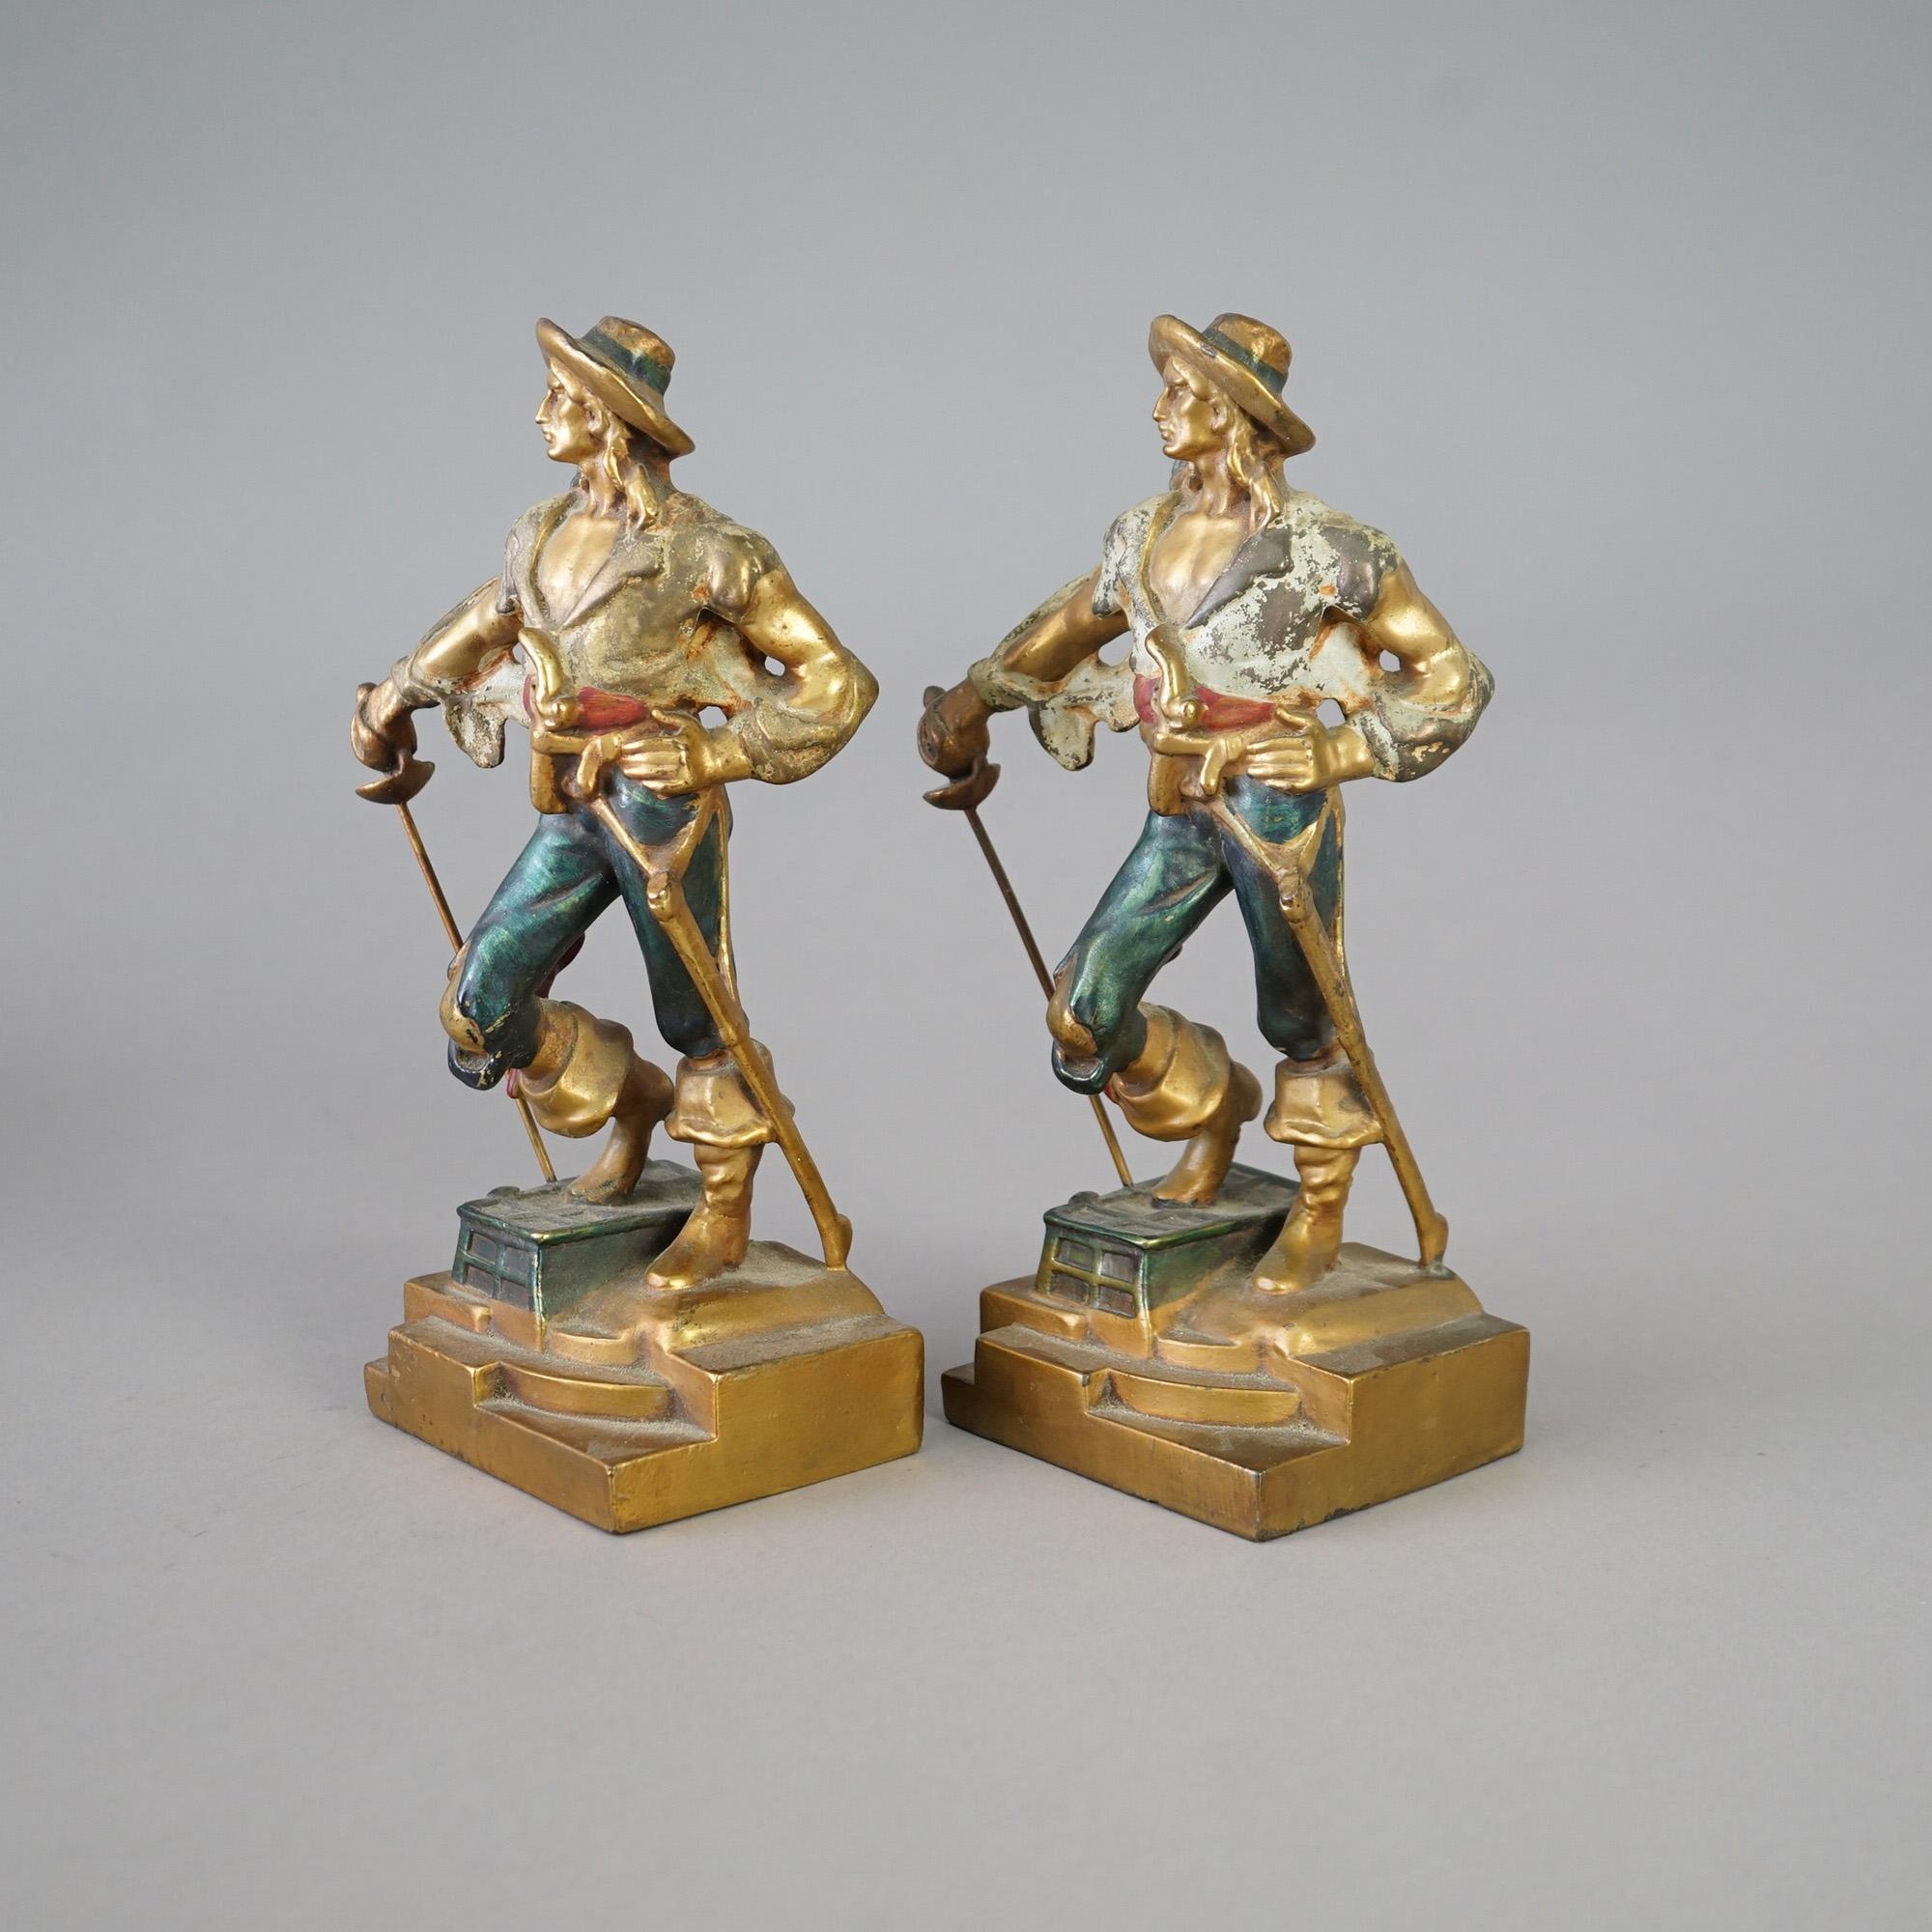 An antique pair of figural bookends in the manner of Frankart offer polychromed cast bronze pirate figure with sword, c1920

Measure - 10.5